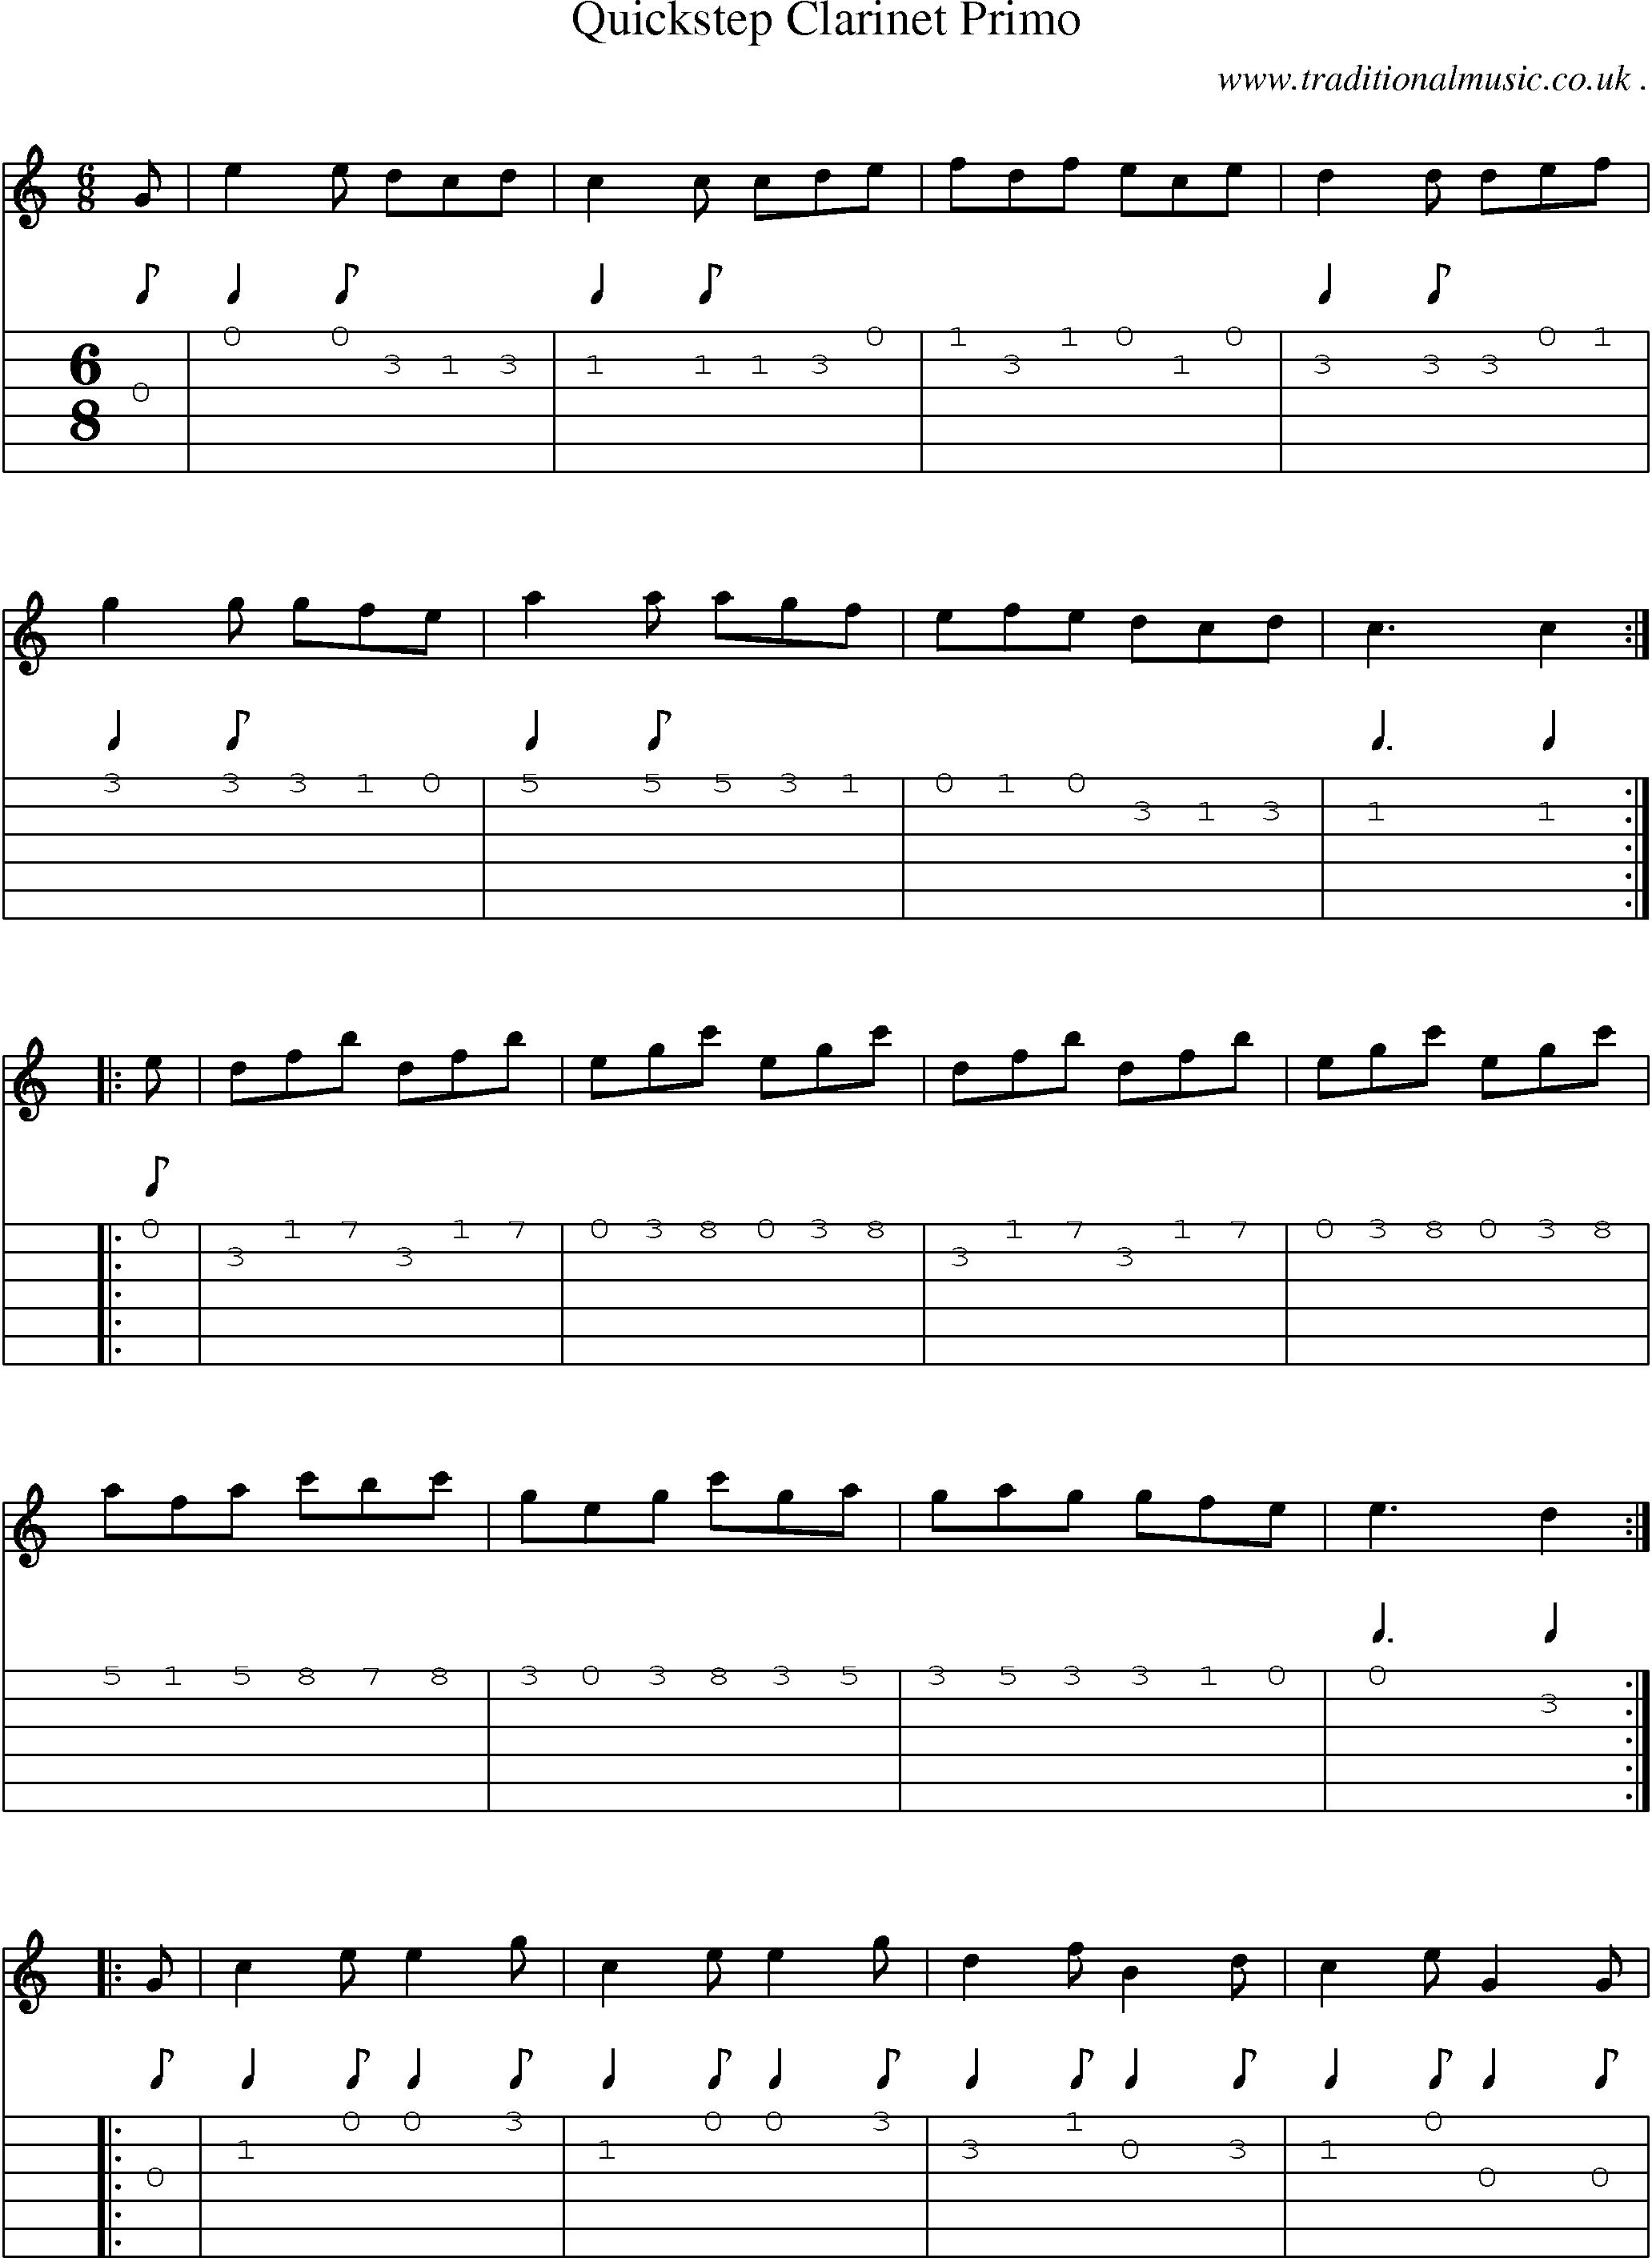 Sheet-Music and Guitar Tabs for Quickstep Clarinet Primo